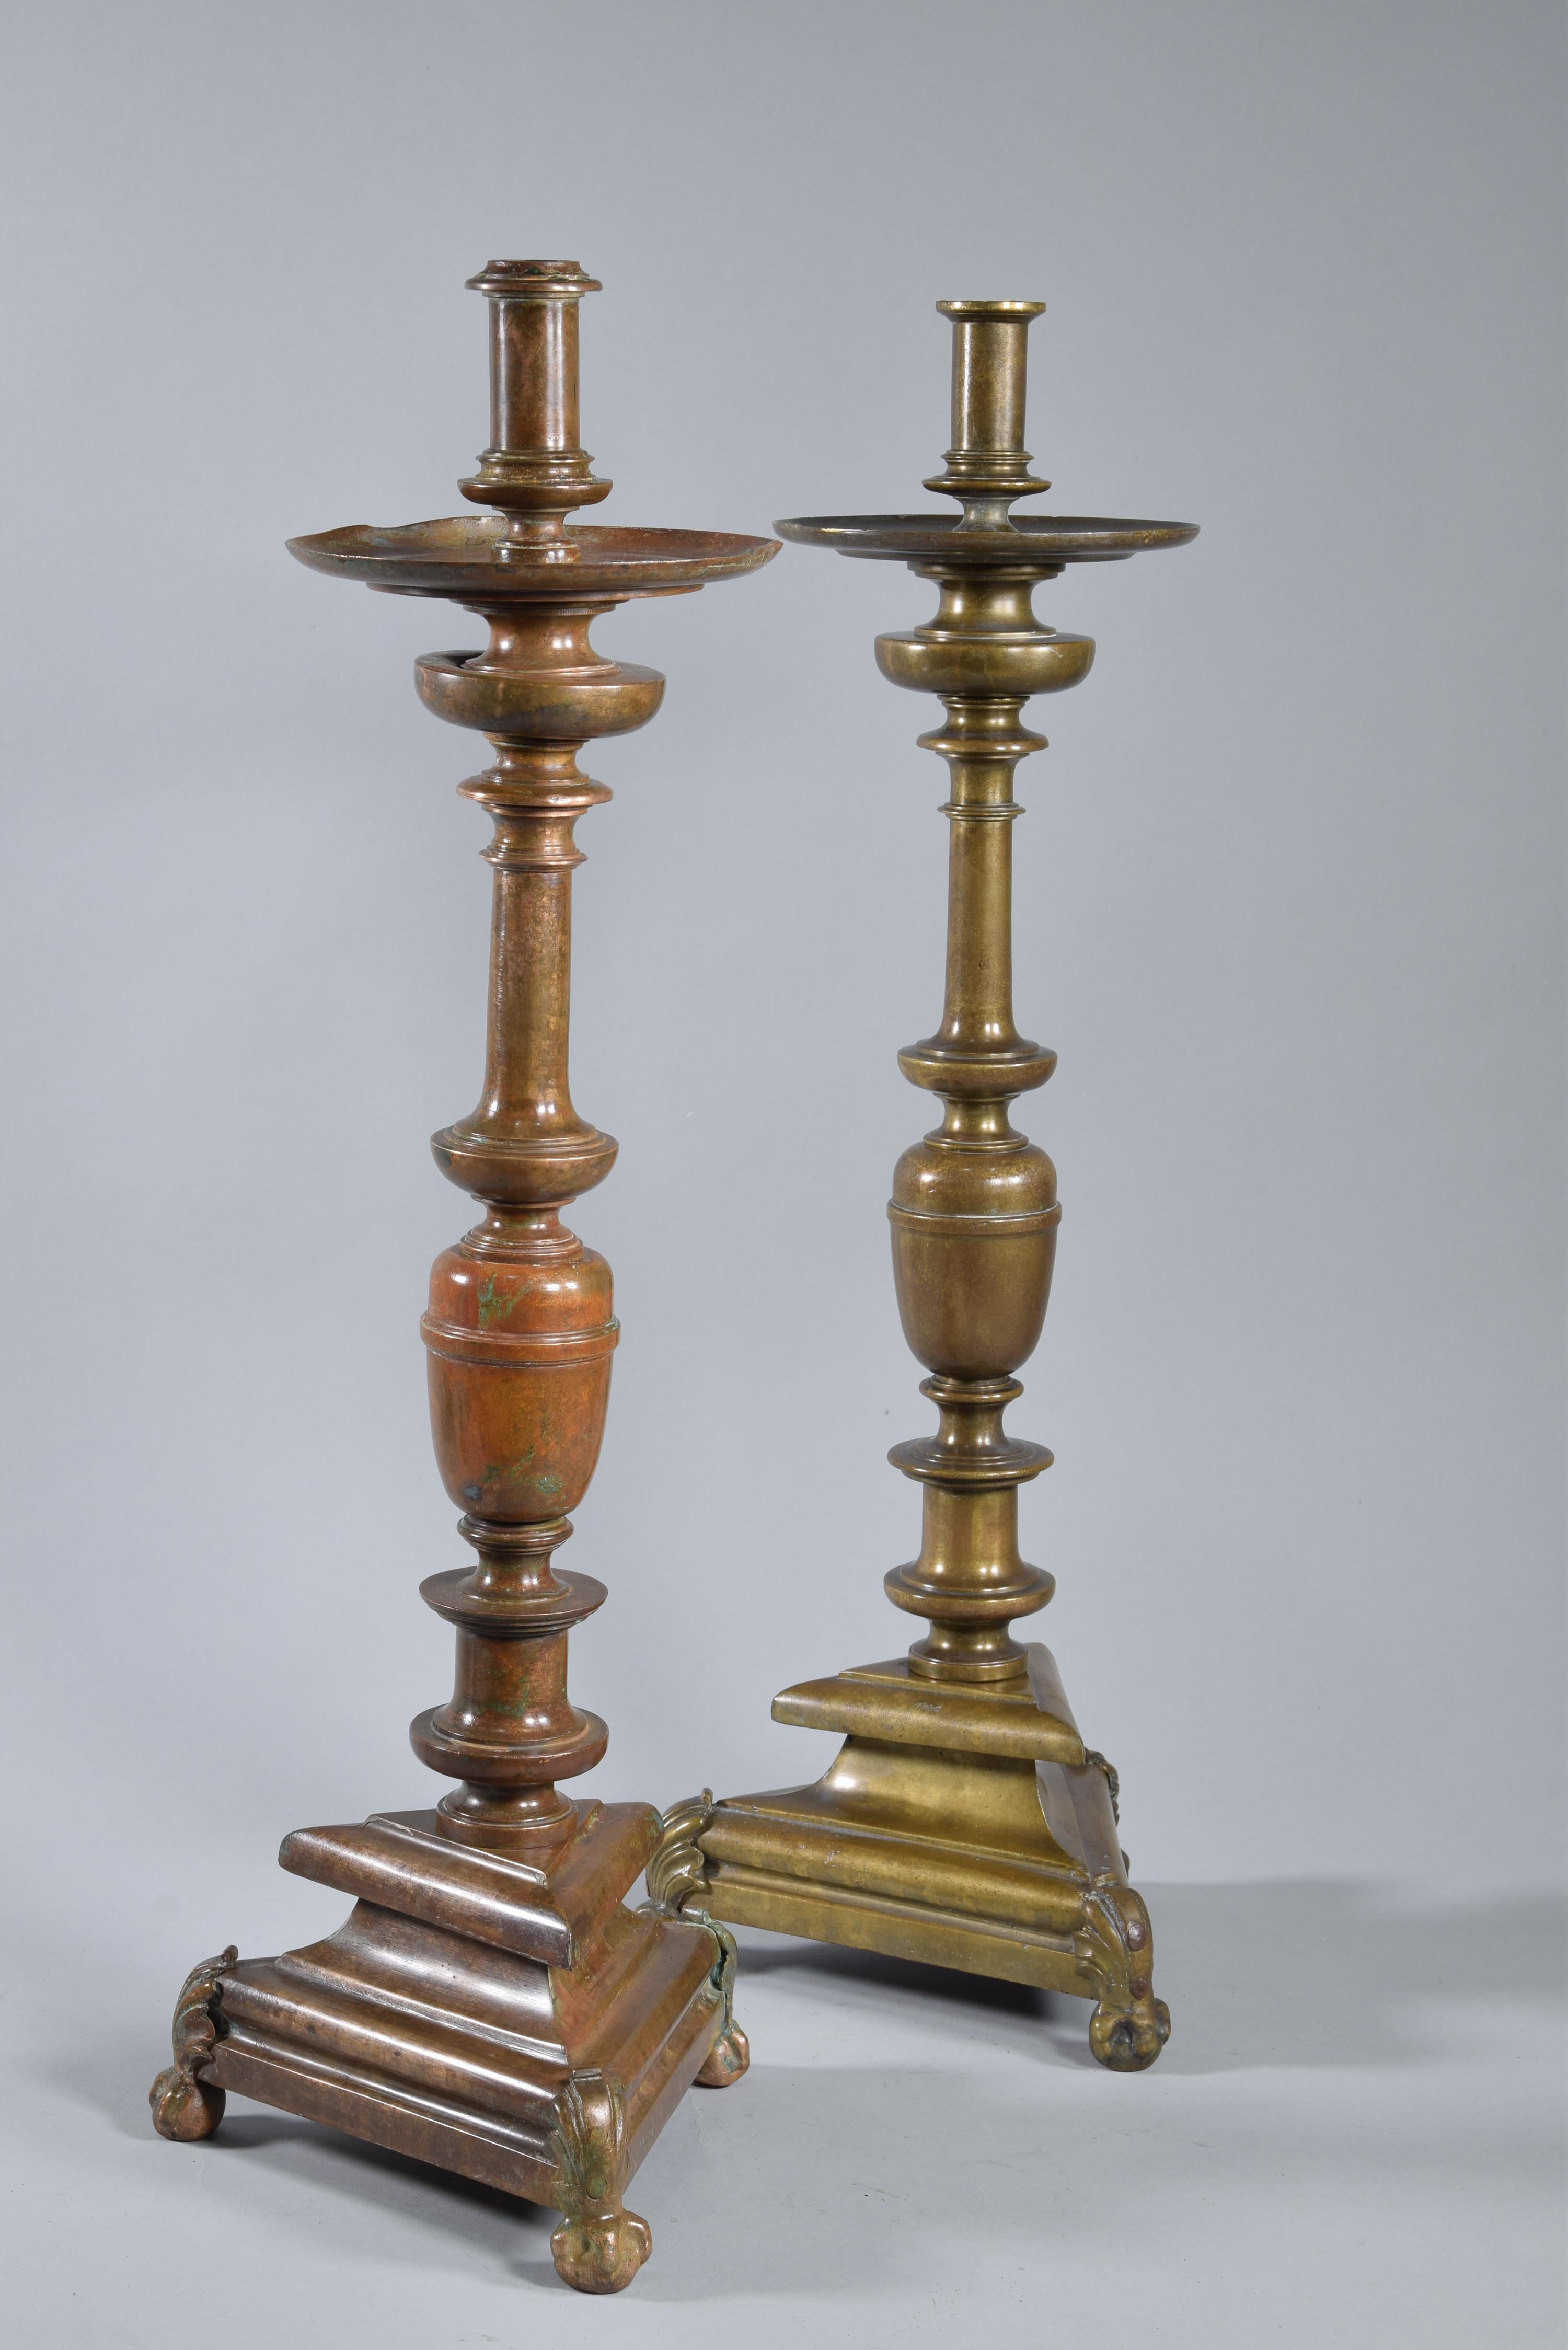 European Bronze Candle Holders Pair, 20th Century, after Antique Models For Sale